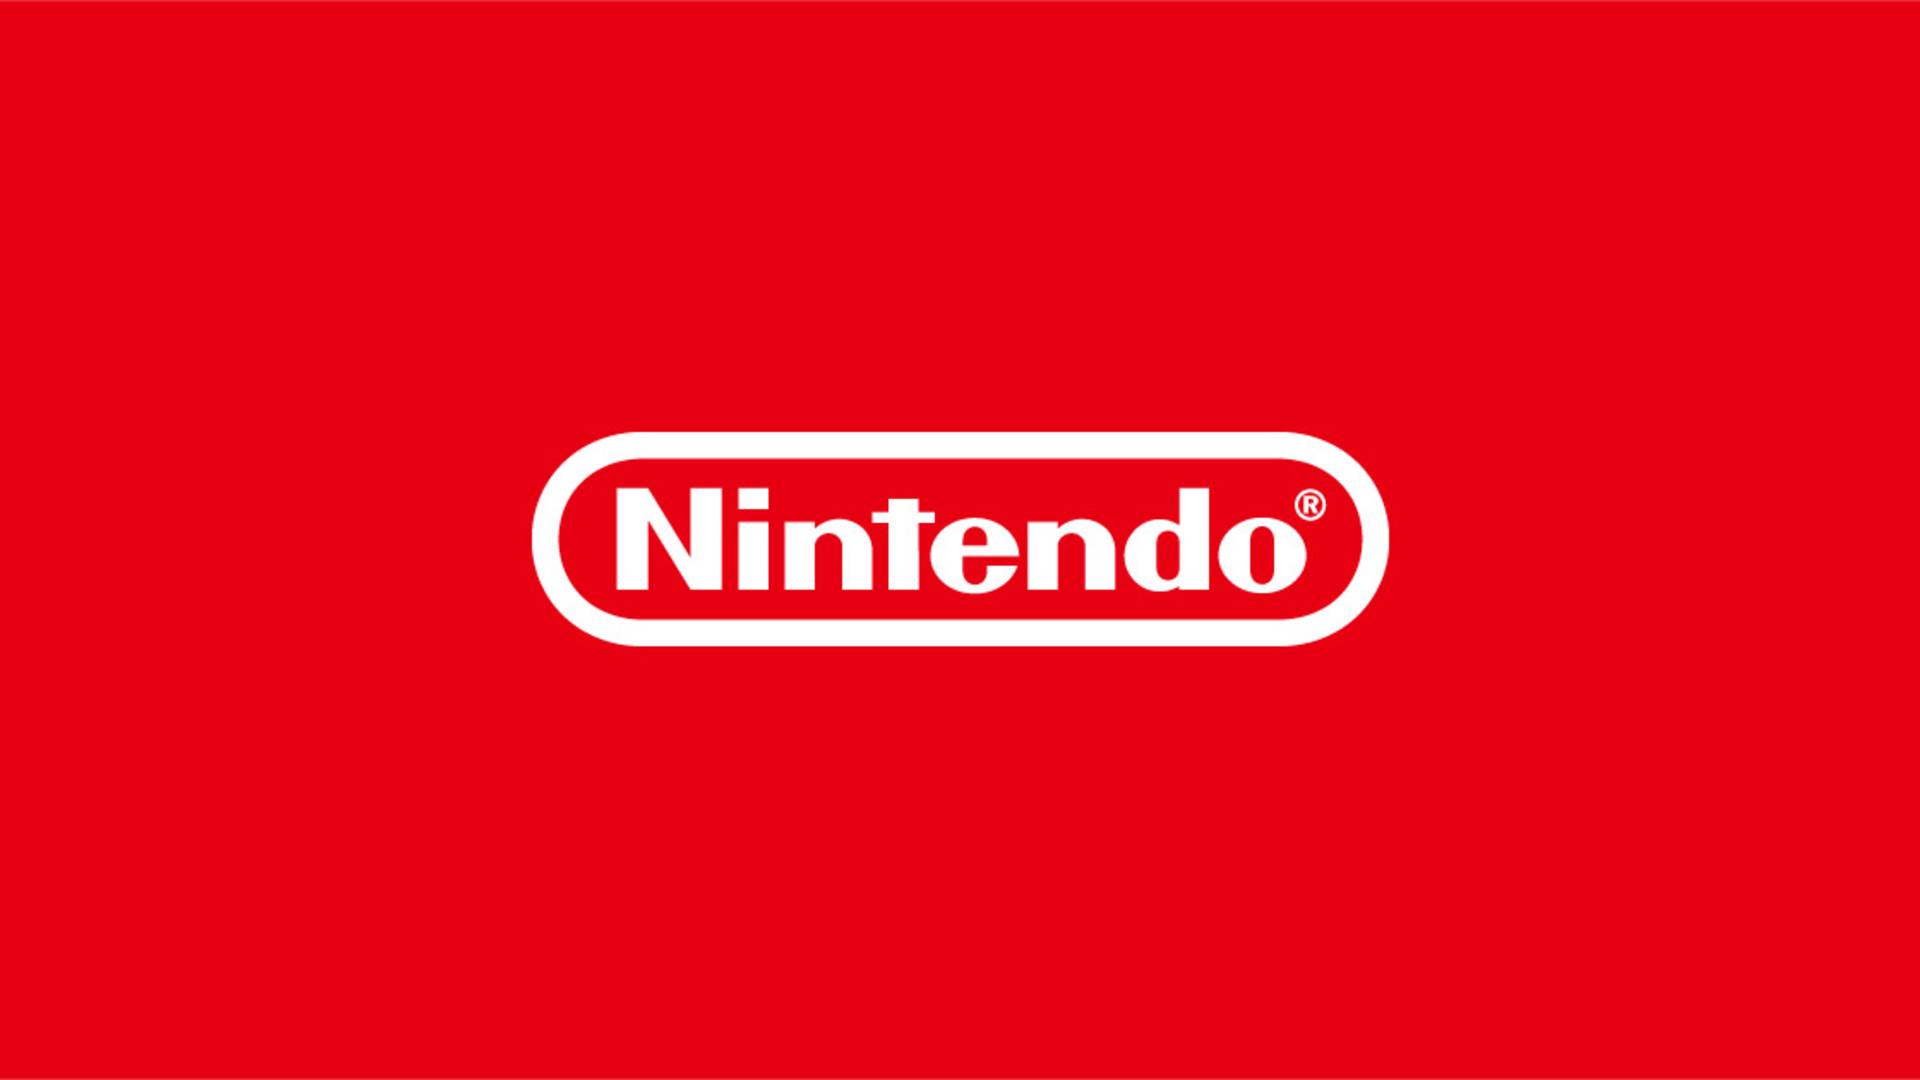 Nintendo E3 Direct will take place on June 15